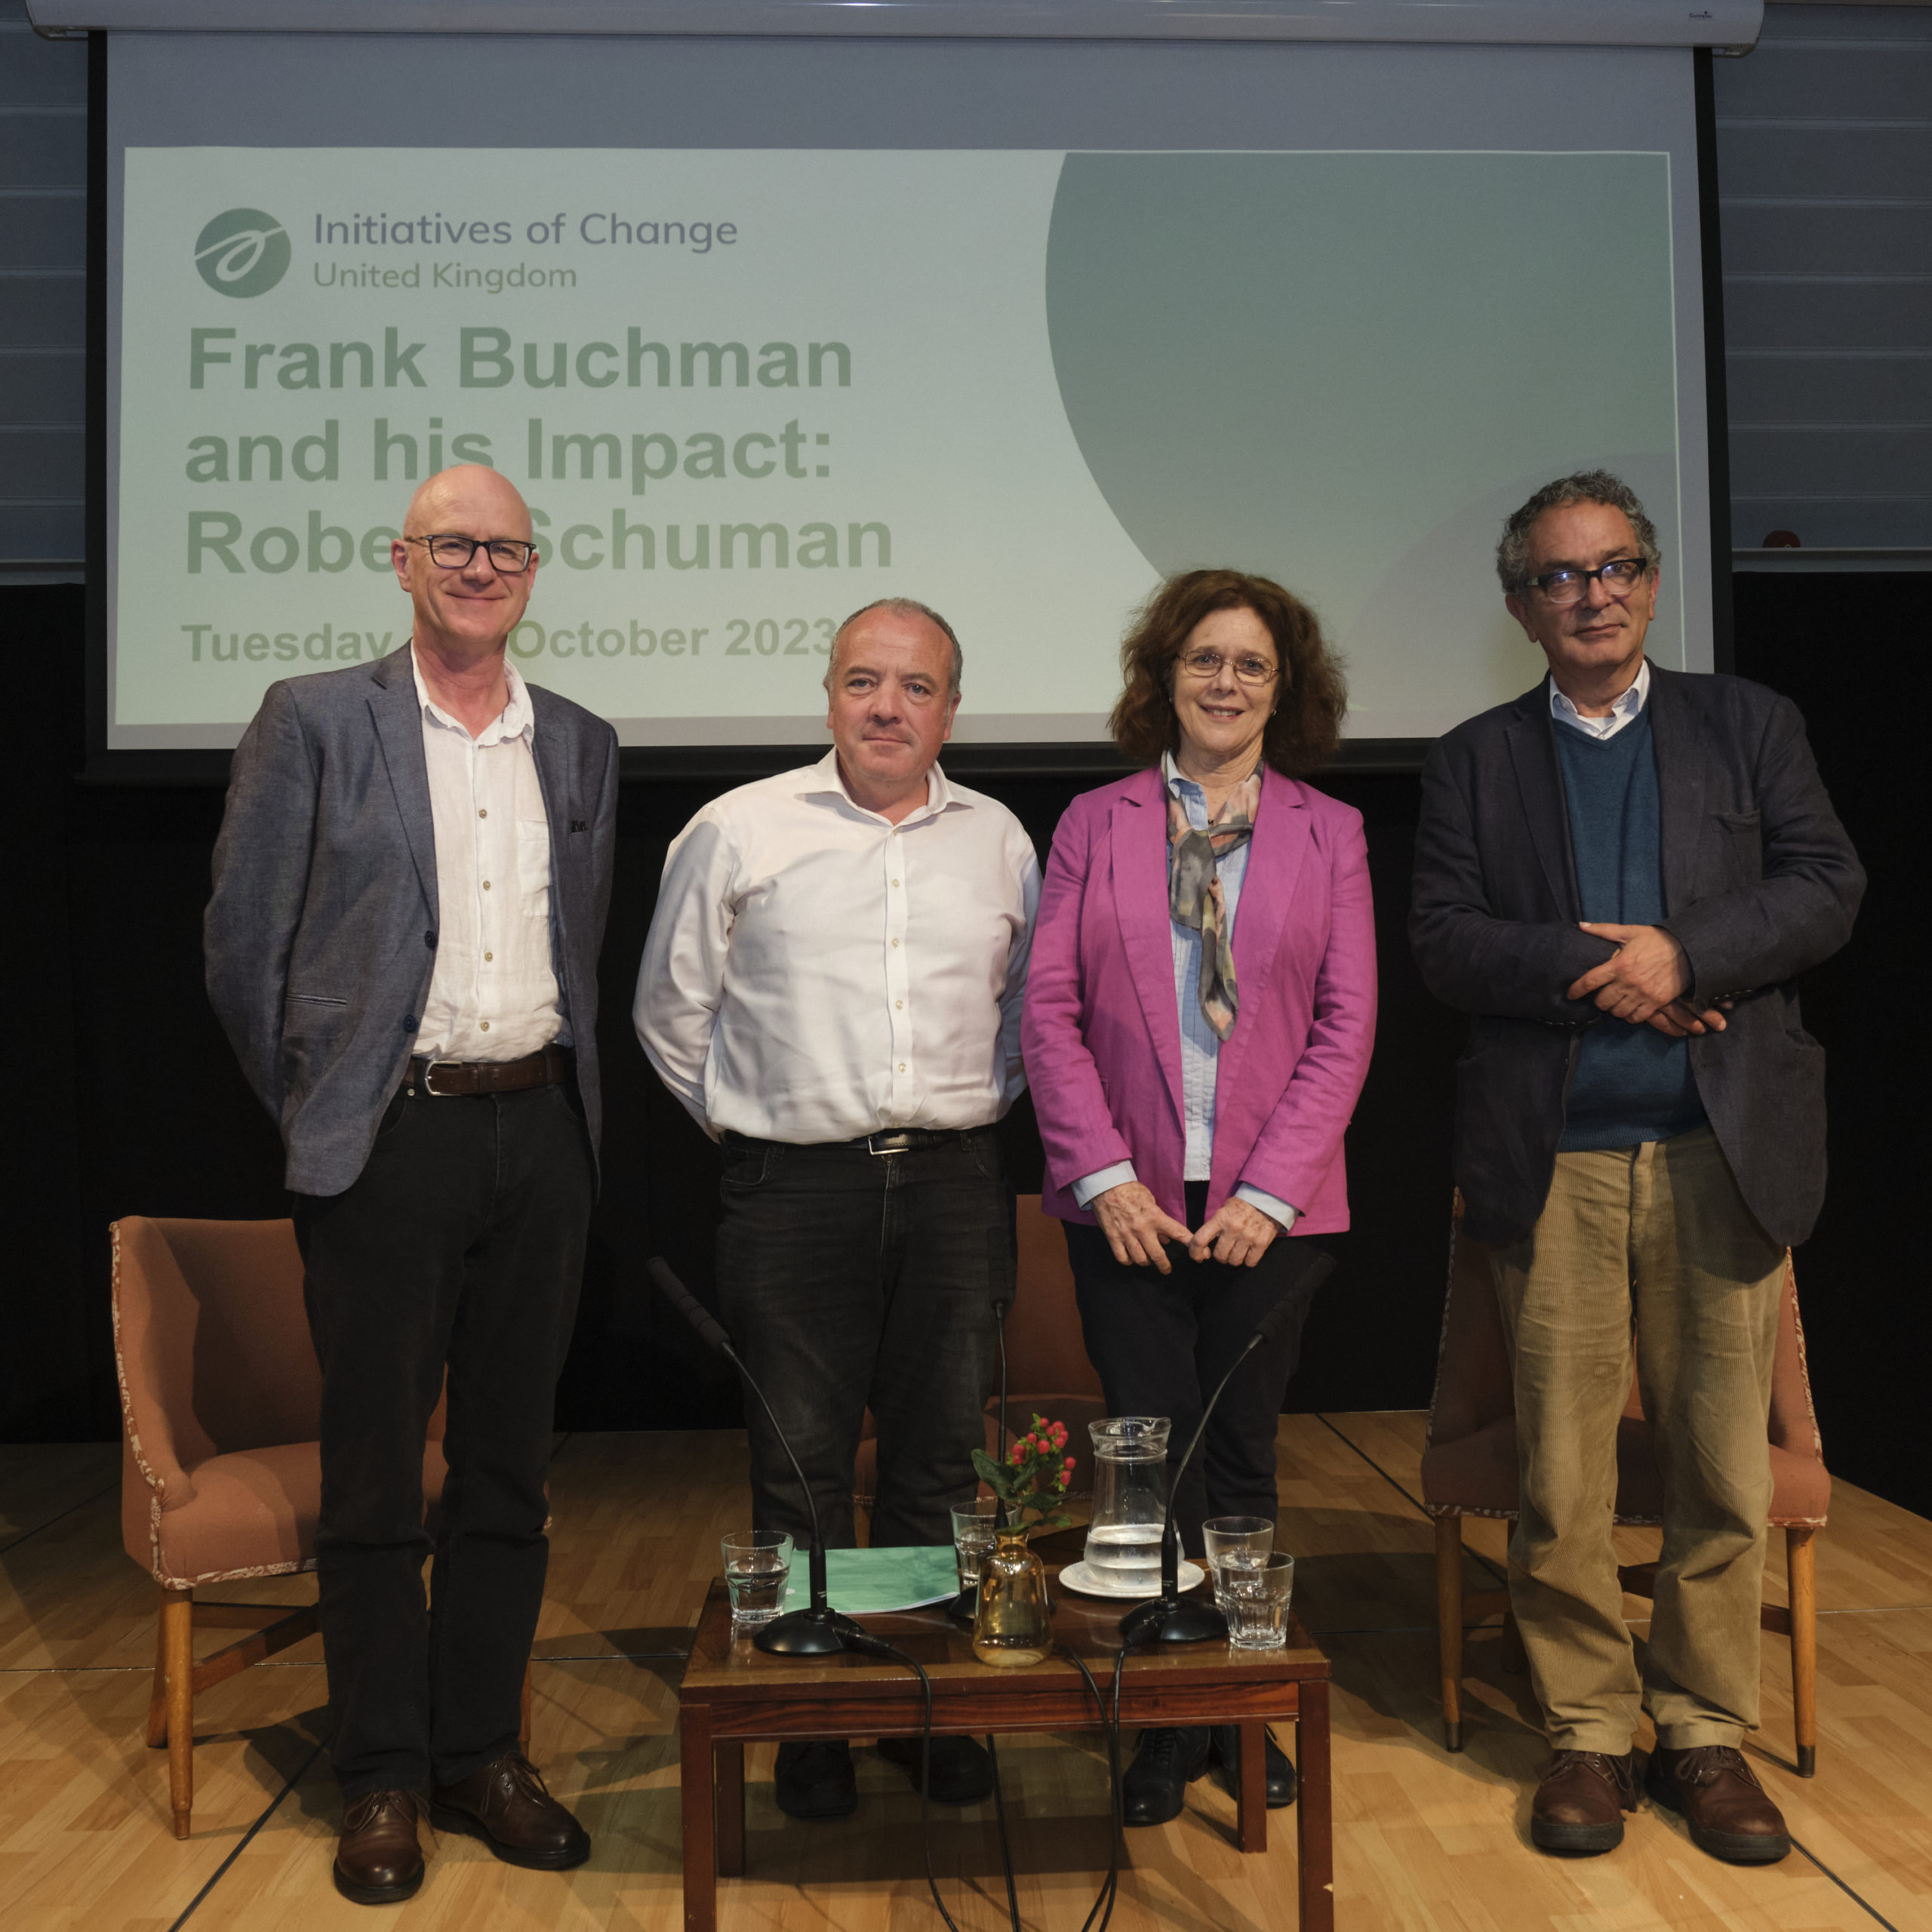 Dr Philip Boobbyer, Mike Kane MP, Margaret Cosesns (Chair of IofC UK), and Lord Maurice Glasman.